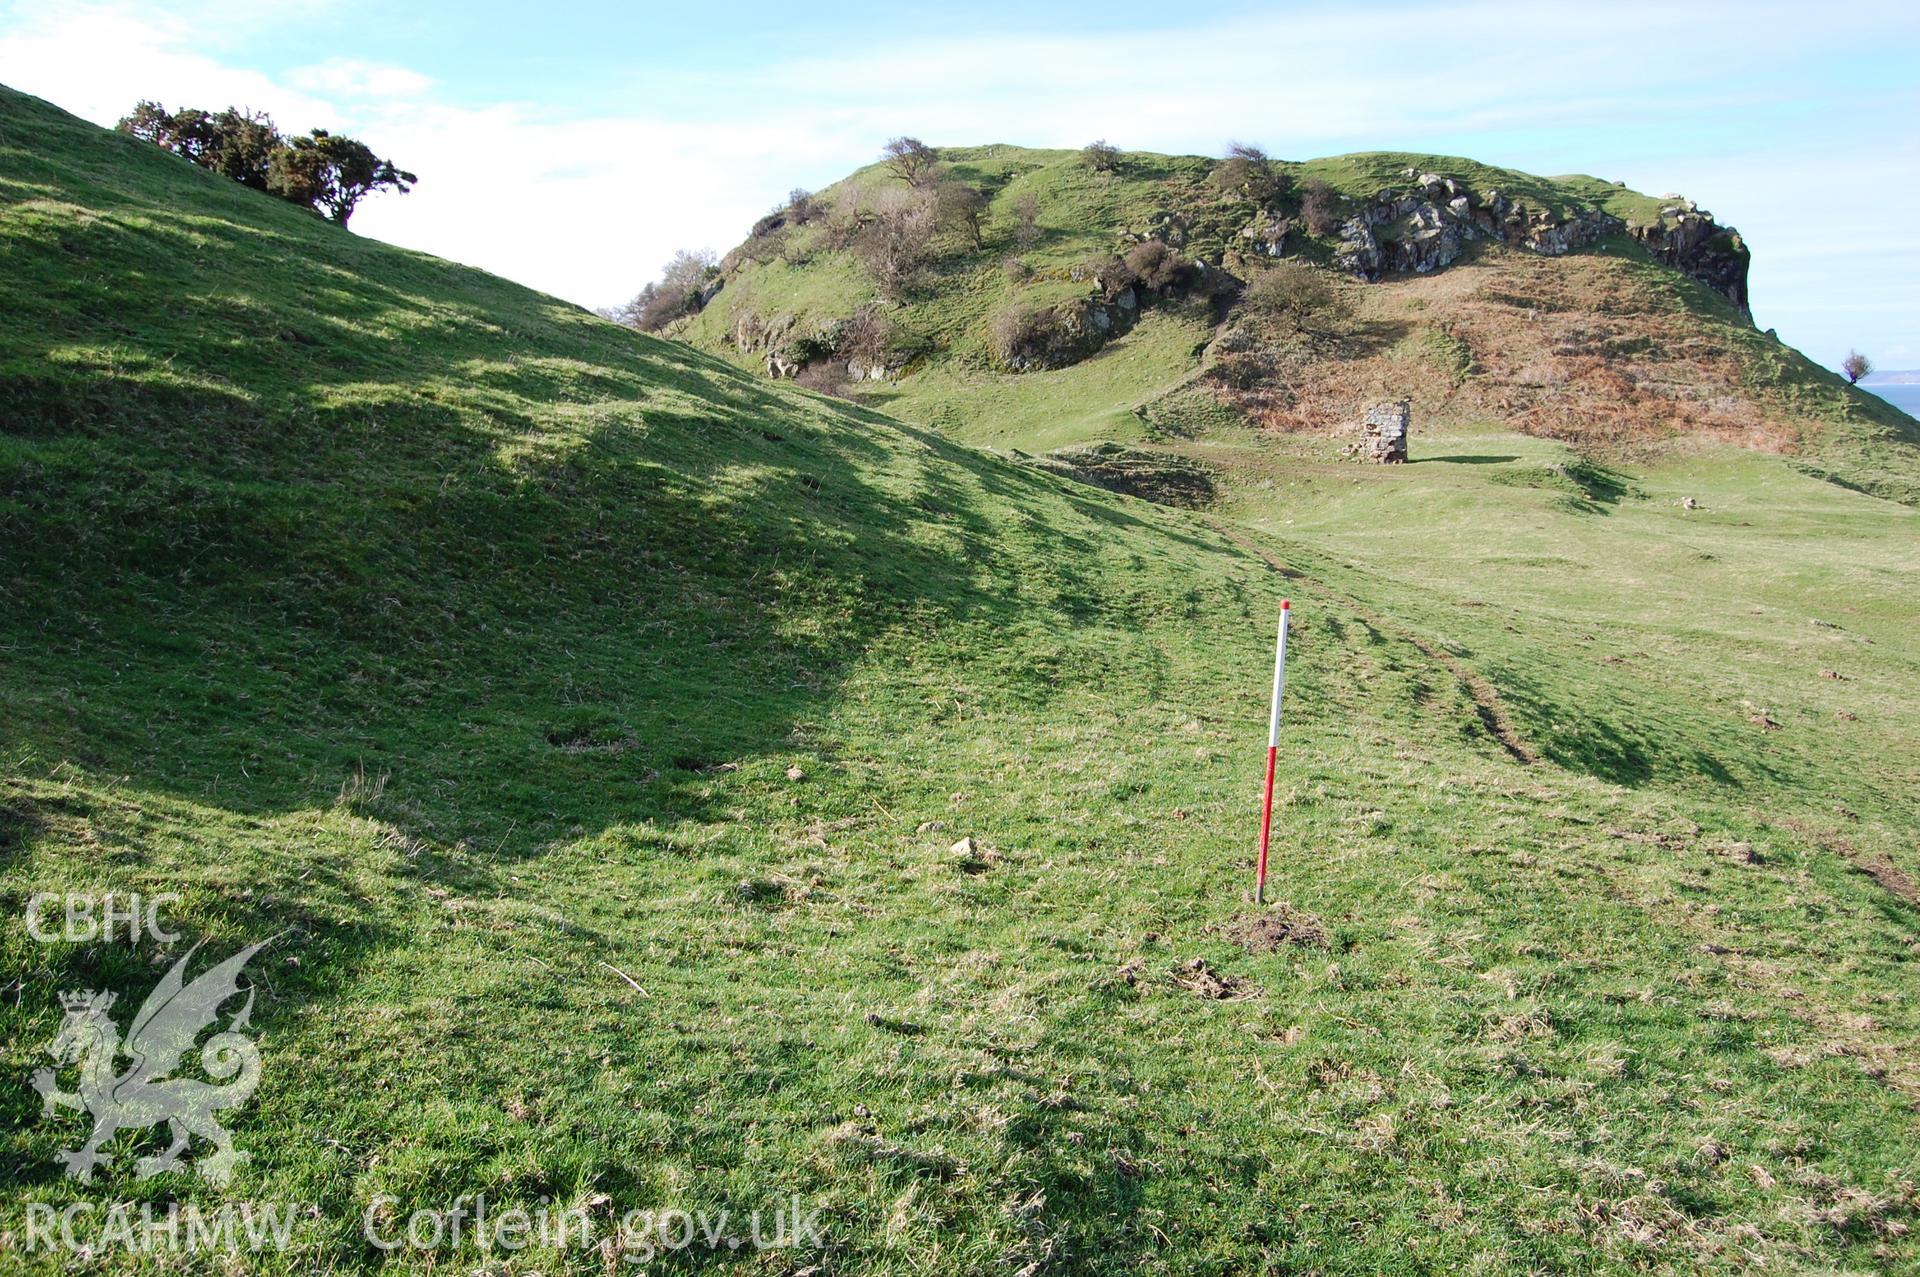 Digital photograph from an archaeological assessment of Deganwy Castle, carried out by Gwynedd Archaeological Trust, 2009. Building platform higher up slope.